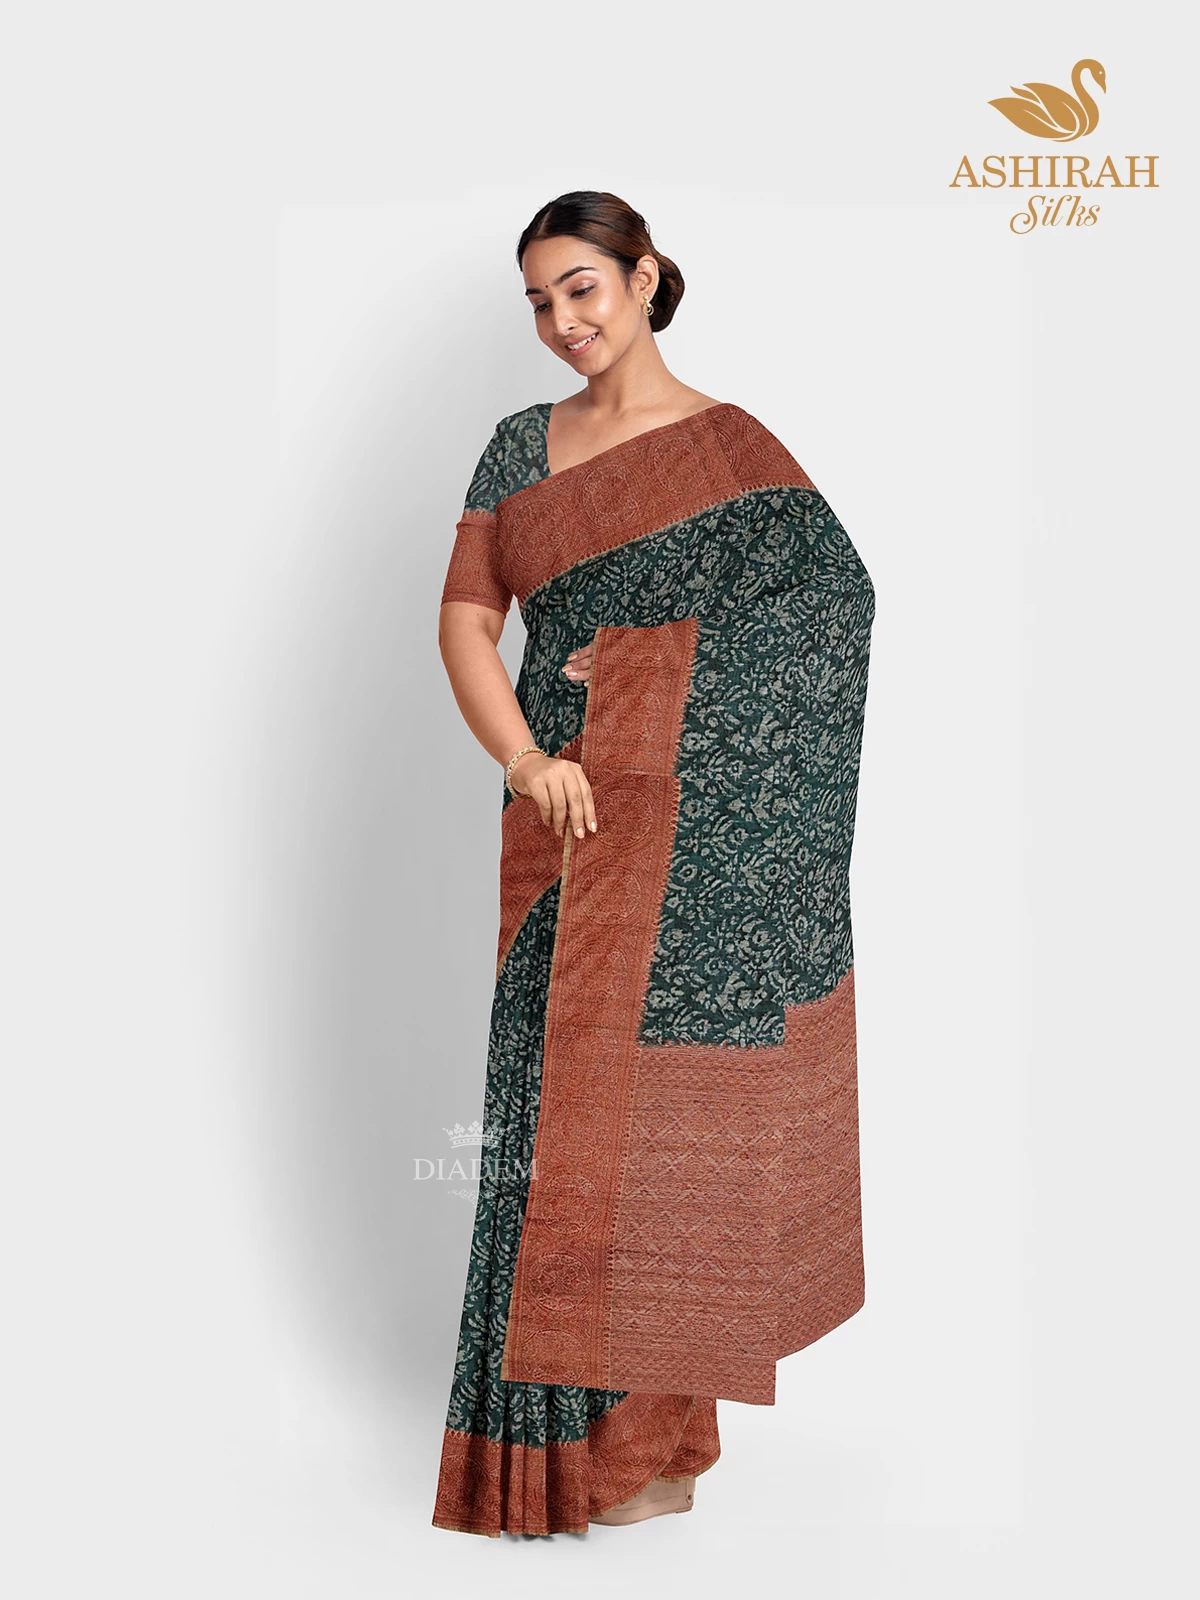 Peacock Green Chanderi Silk Cotton Saree with Floral Prints on the body and Zari Border